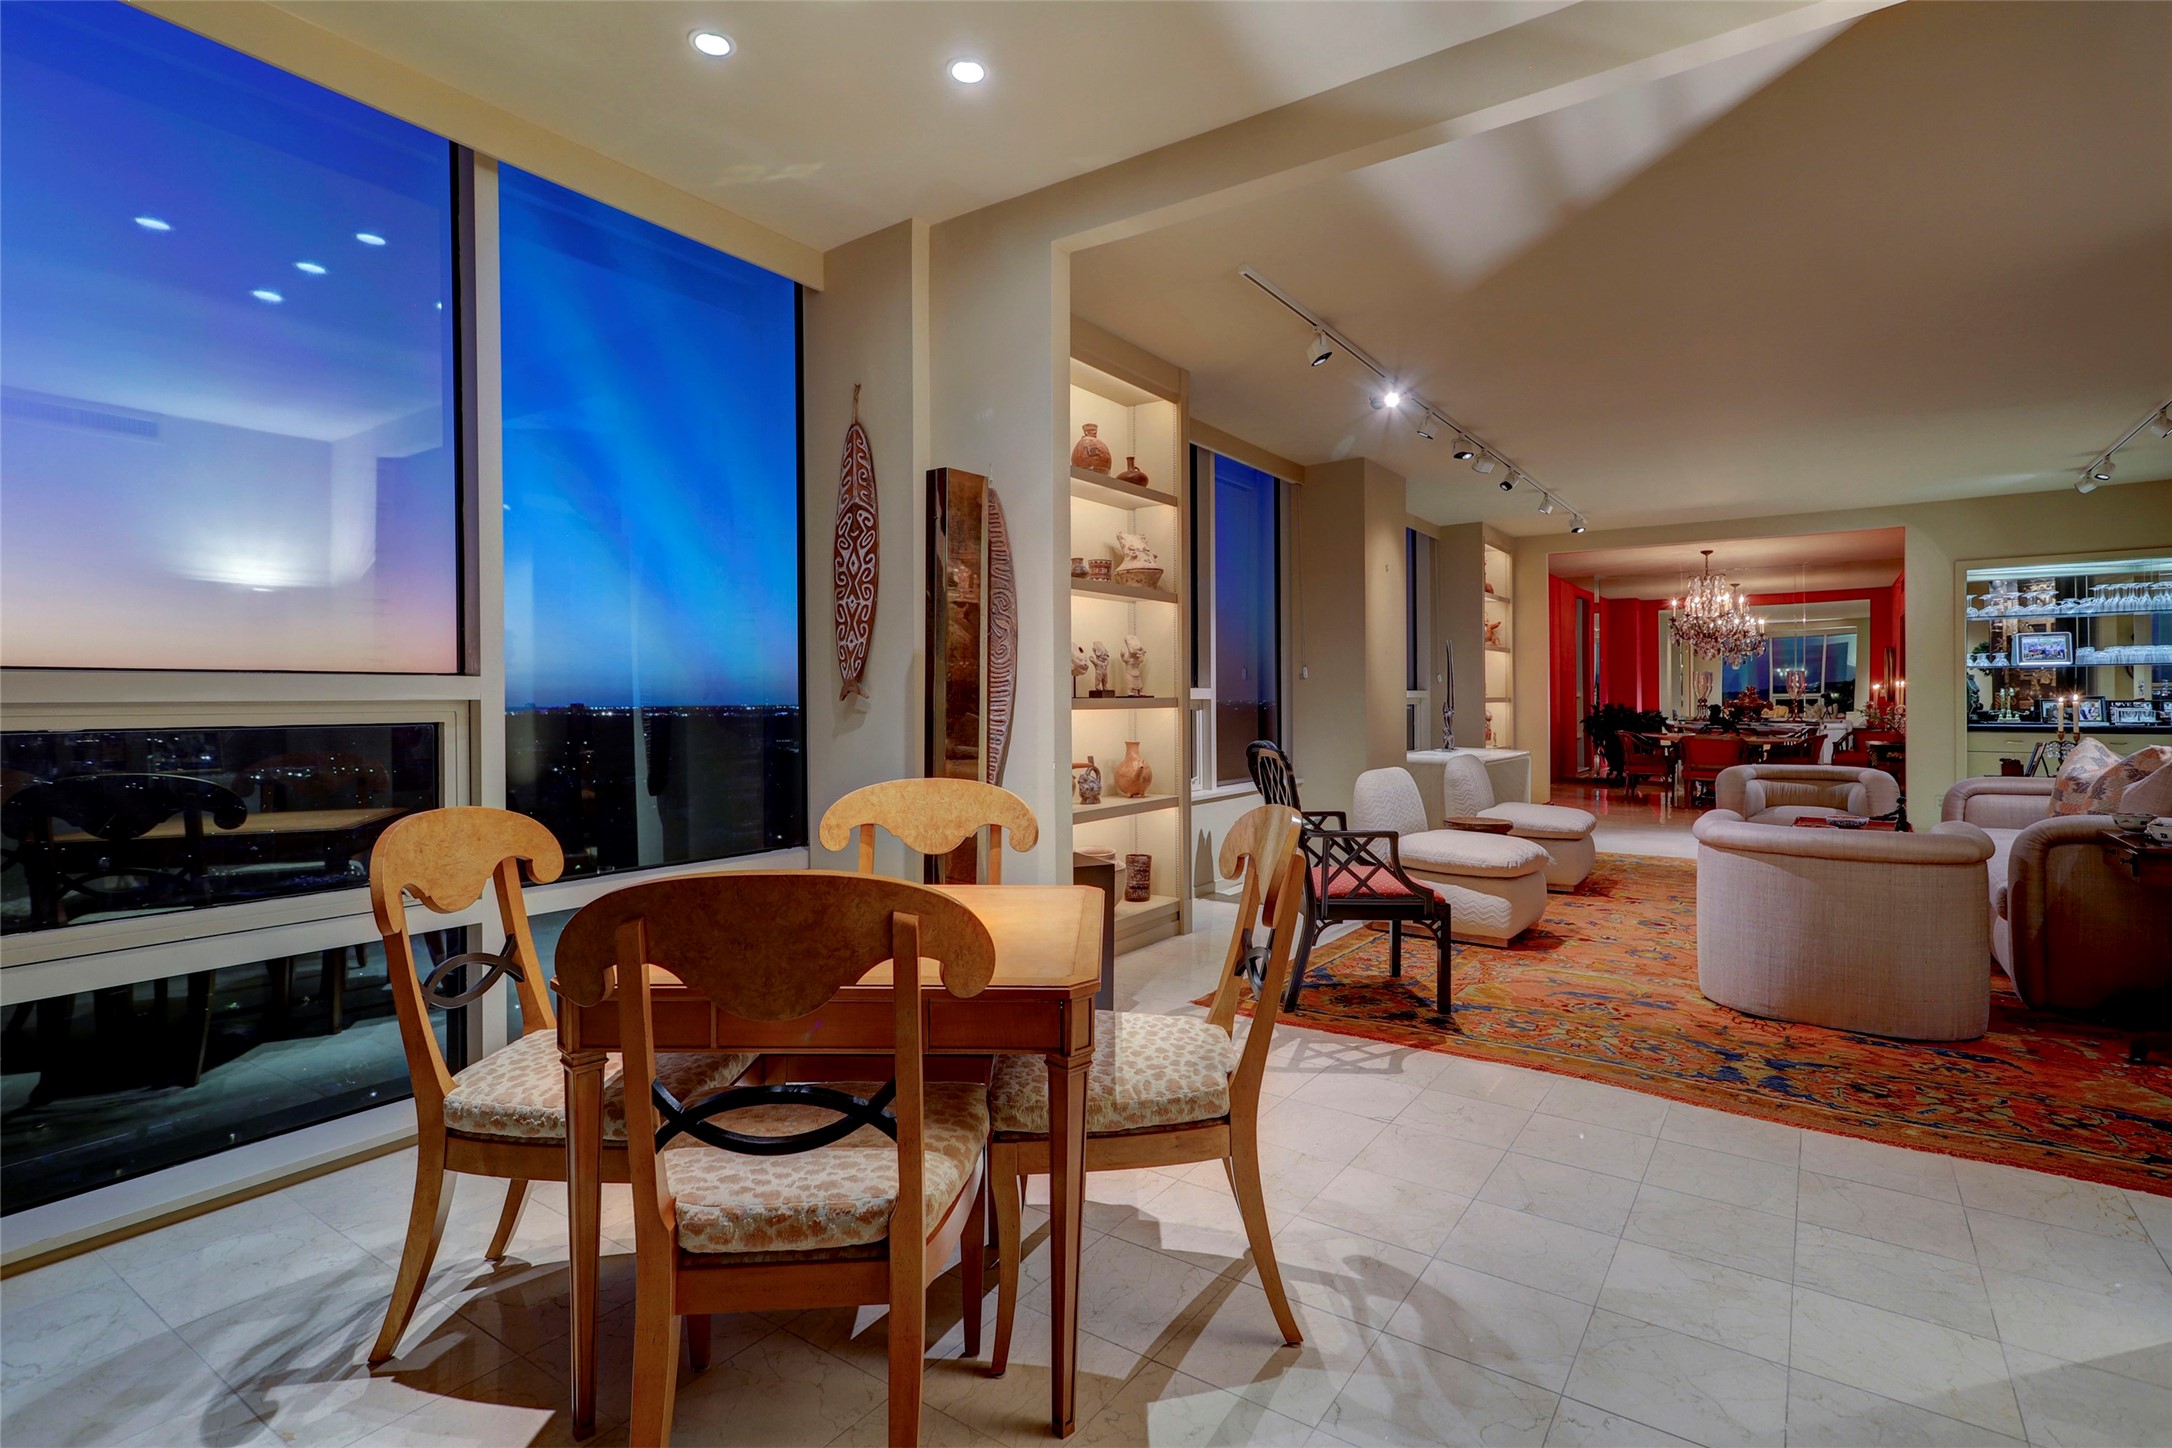 This vantage captures the full length of the condo from the den to the dining area.